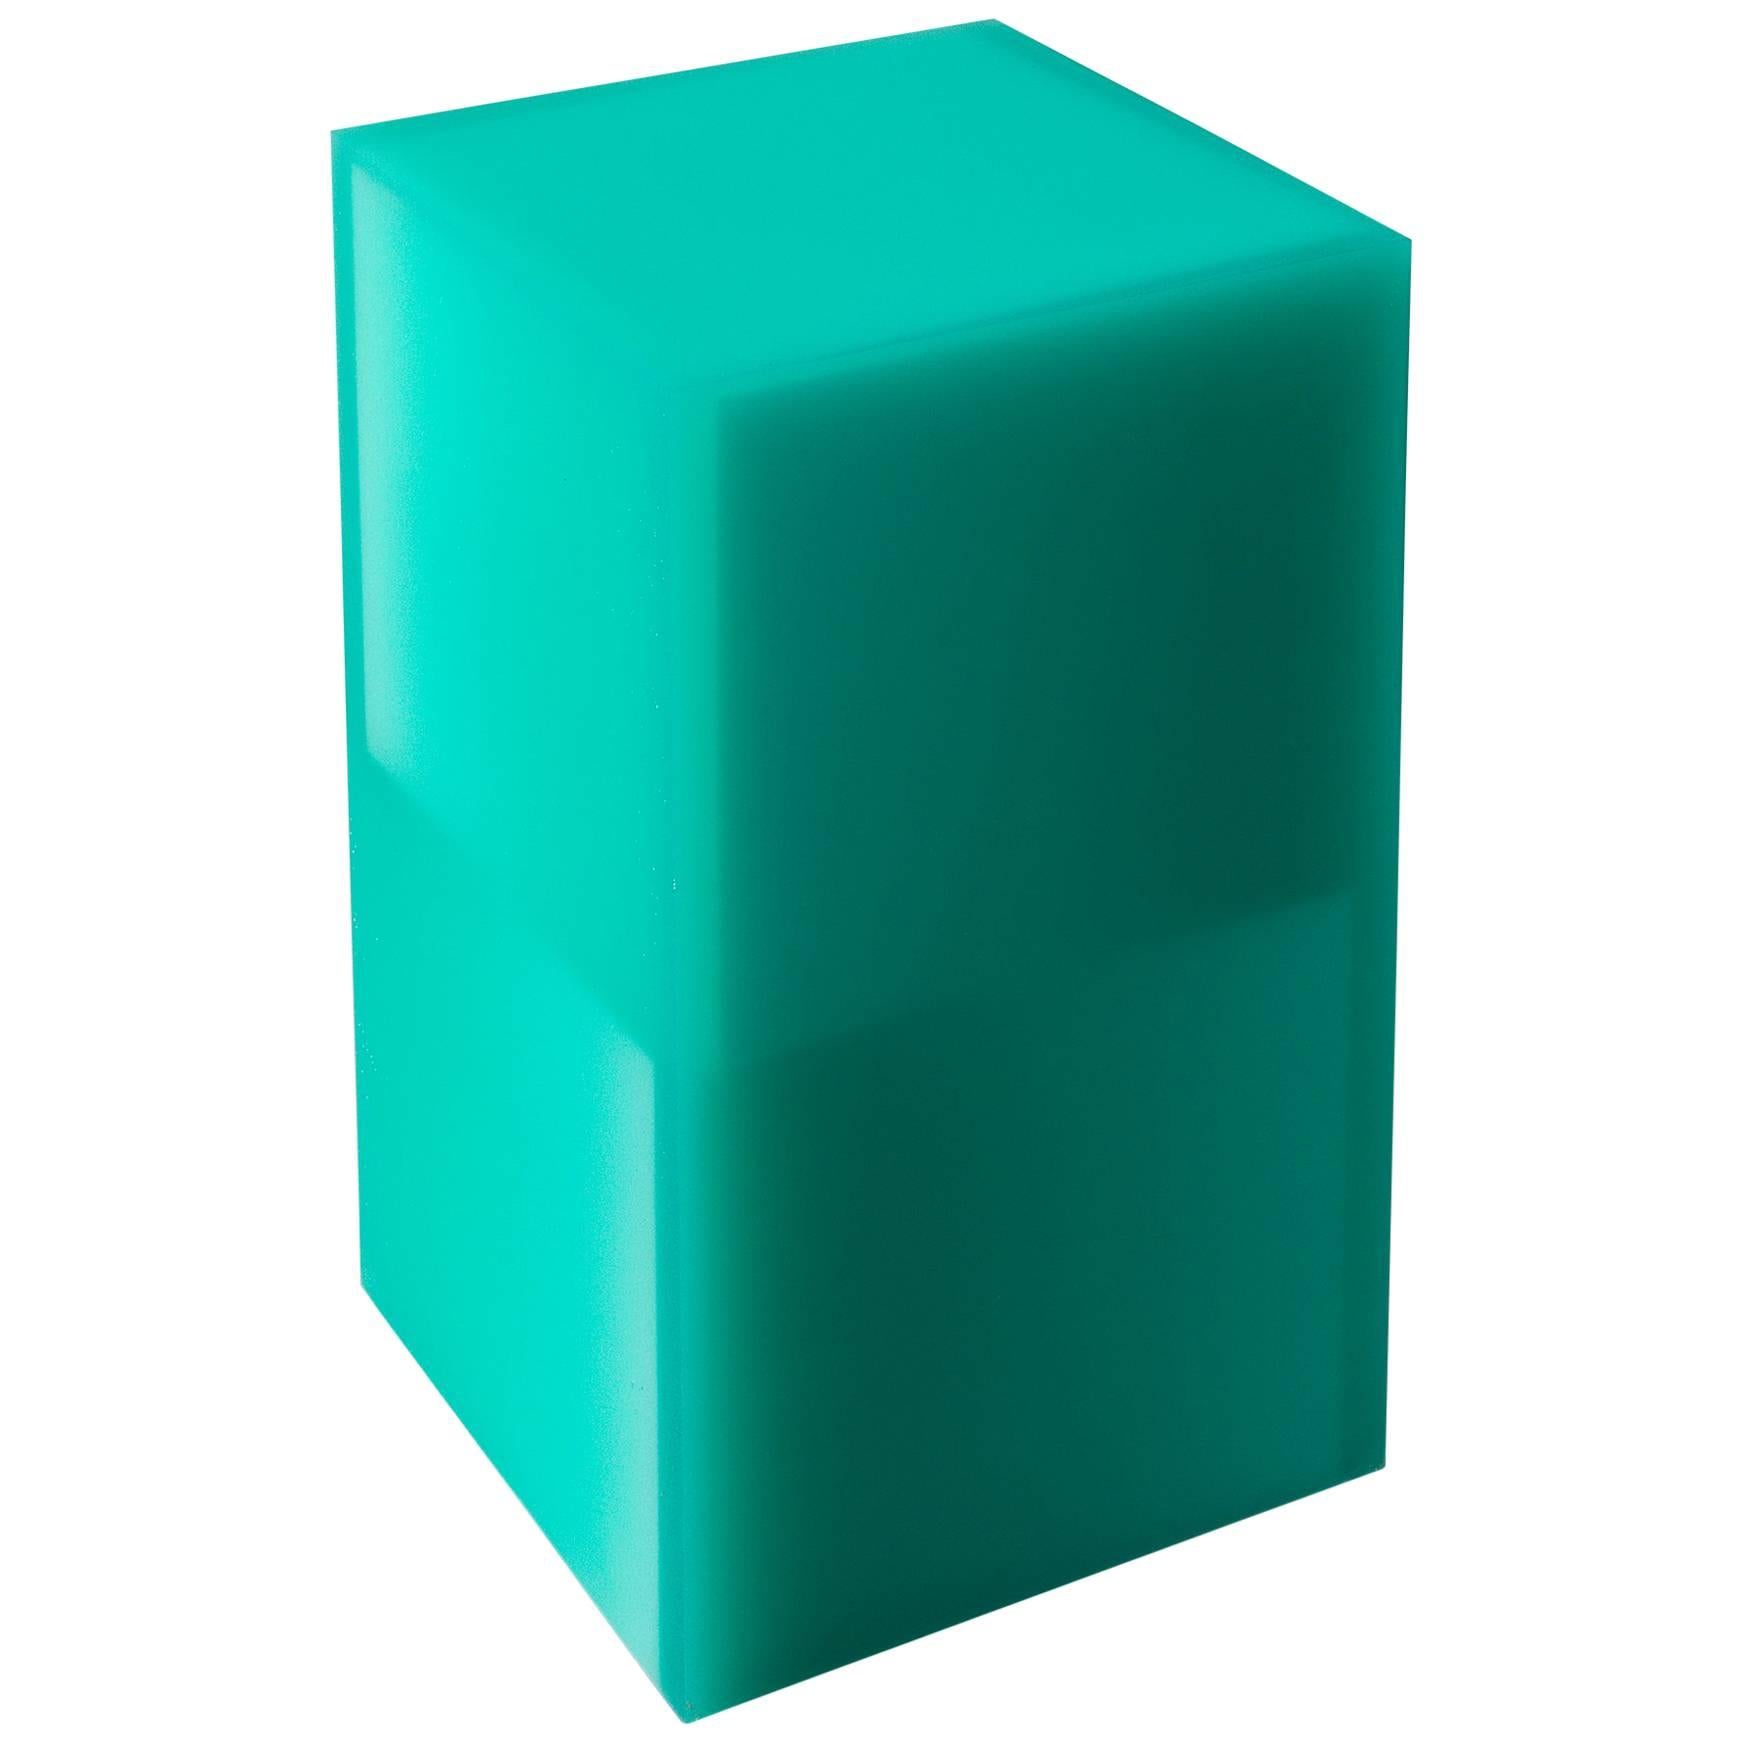 "Shifted Cube Box", Resin, Wood, 2018, Facture Studio For Sale